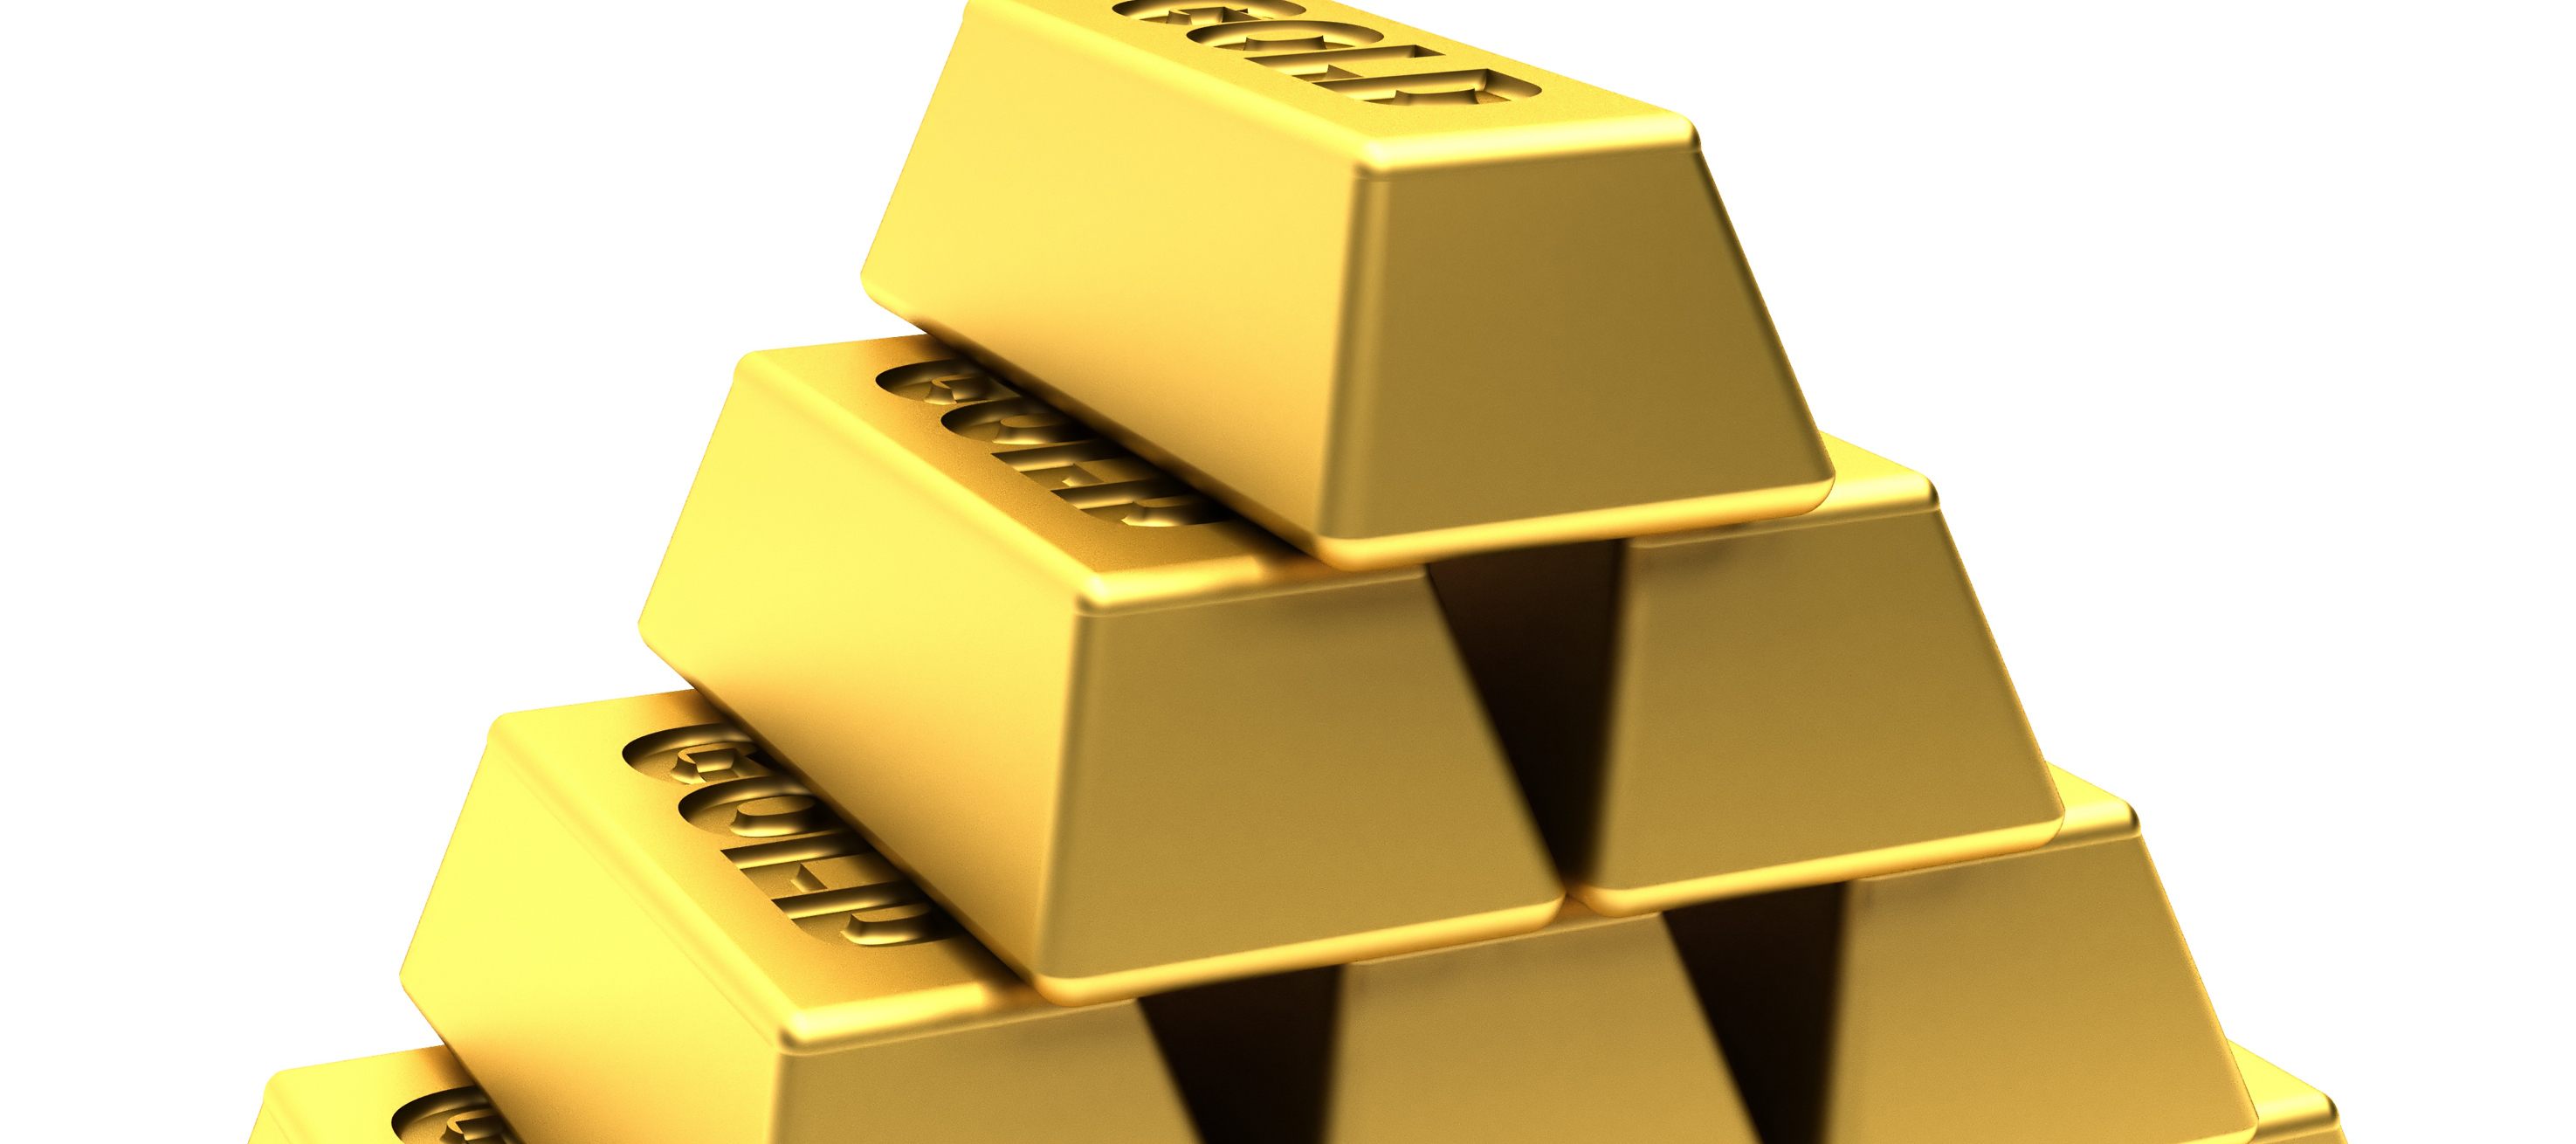 Mining for Gold: How modern CIOs can impact revenue